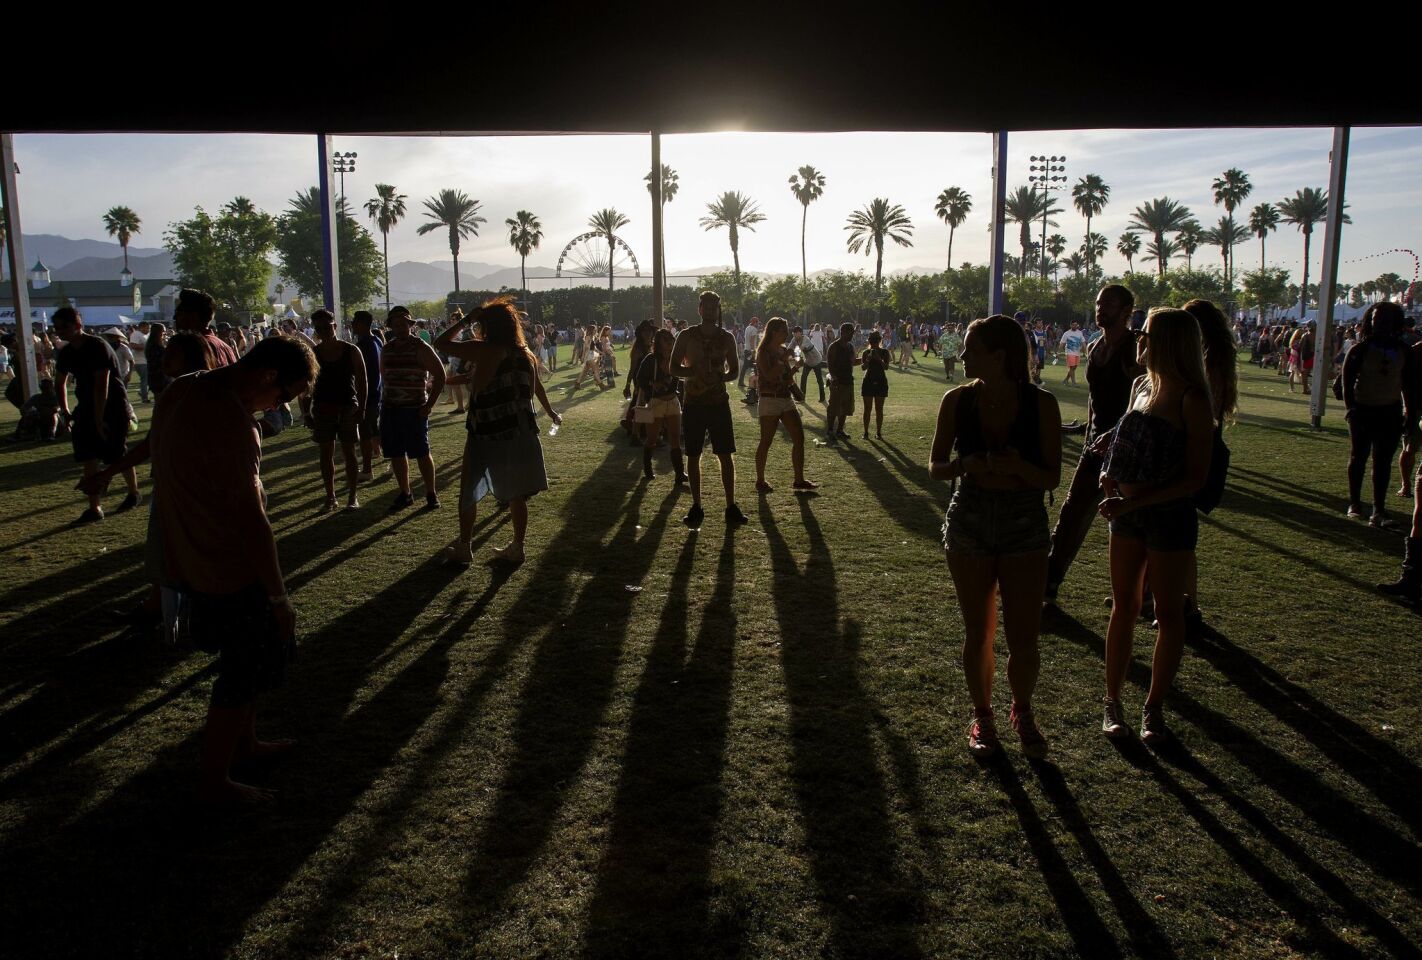 The 2015 Coachella Valley Music and Arts Festival gets underway. On the opening day at Coachella, fans stream through the venue was the sun sets.